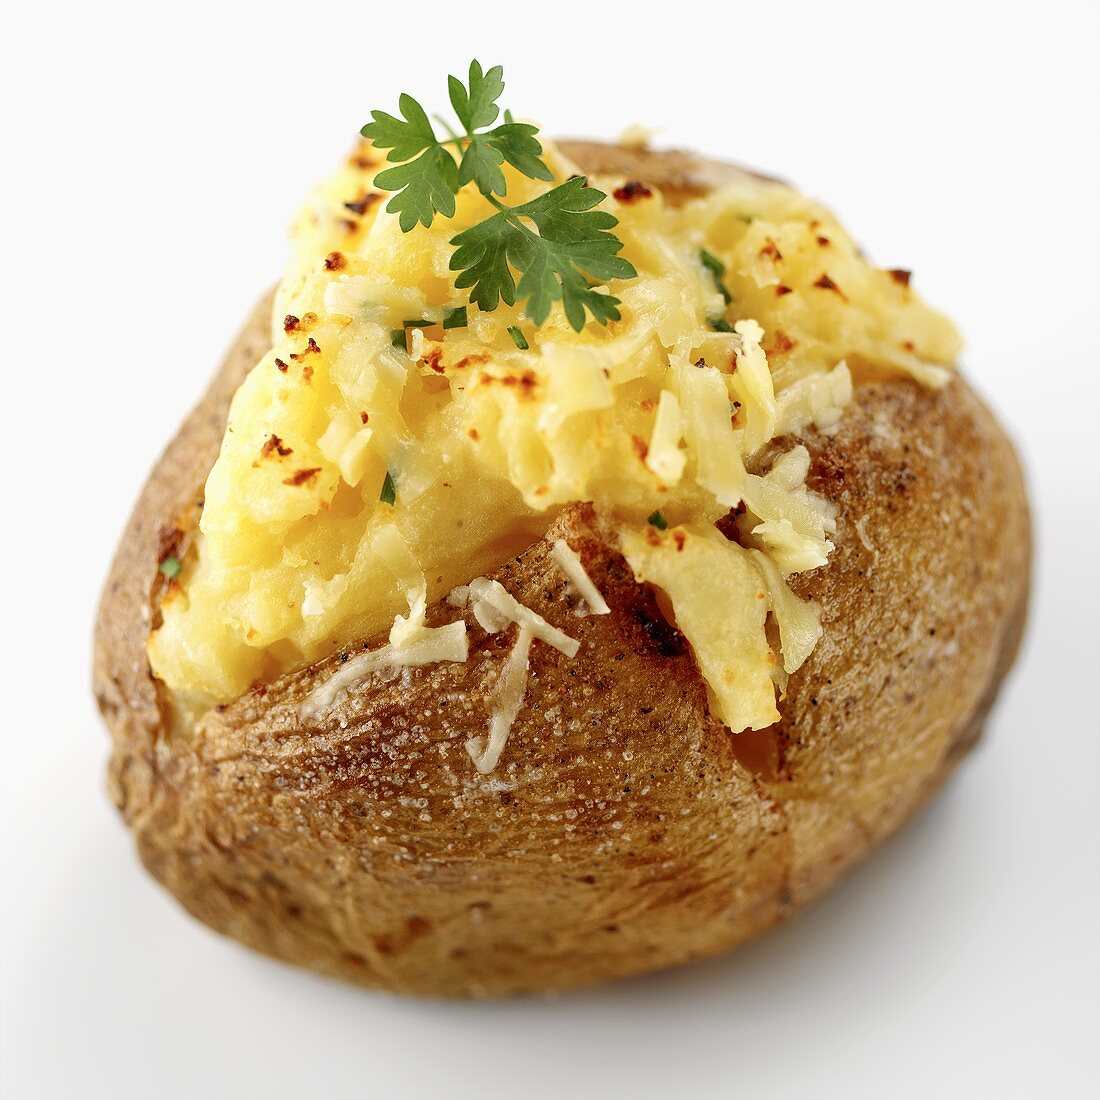 A baked potato with cheese